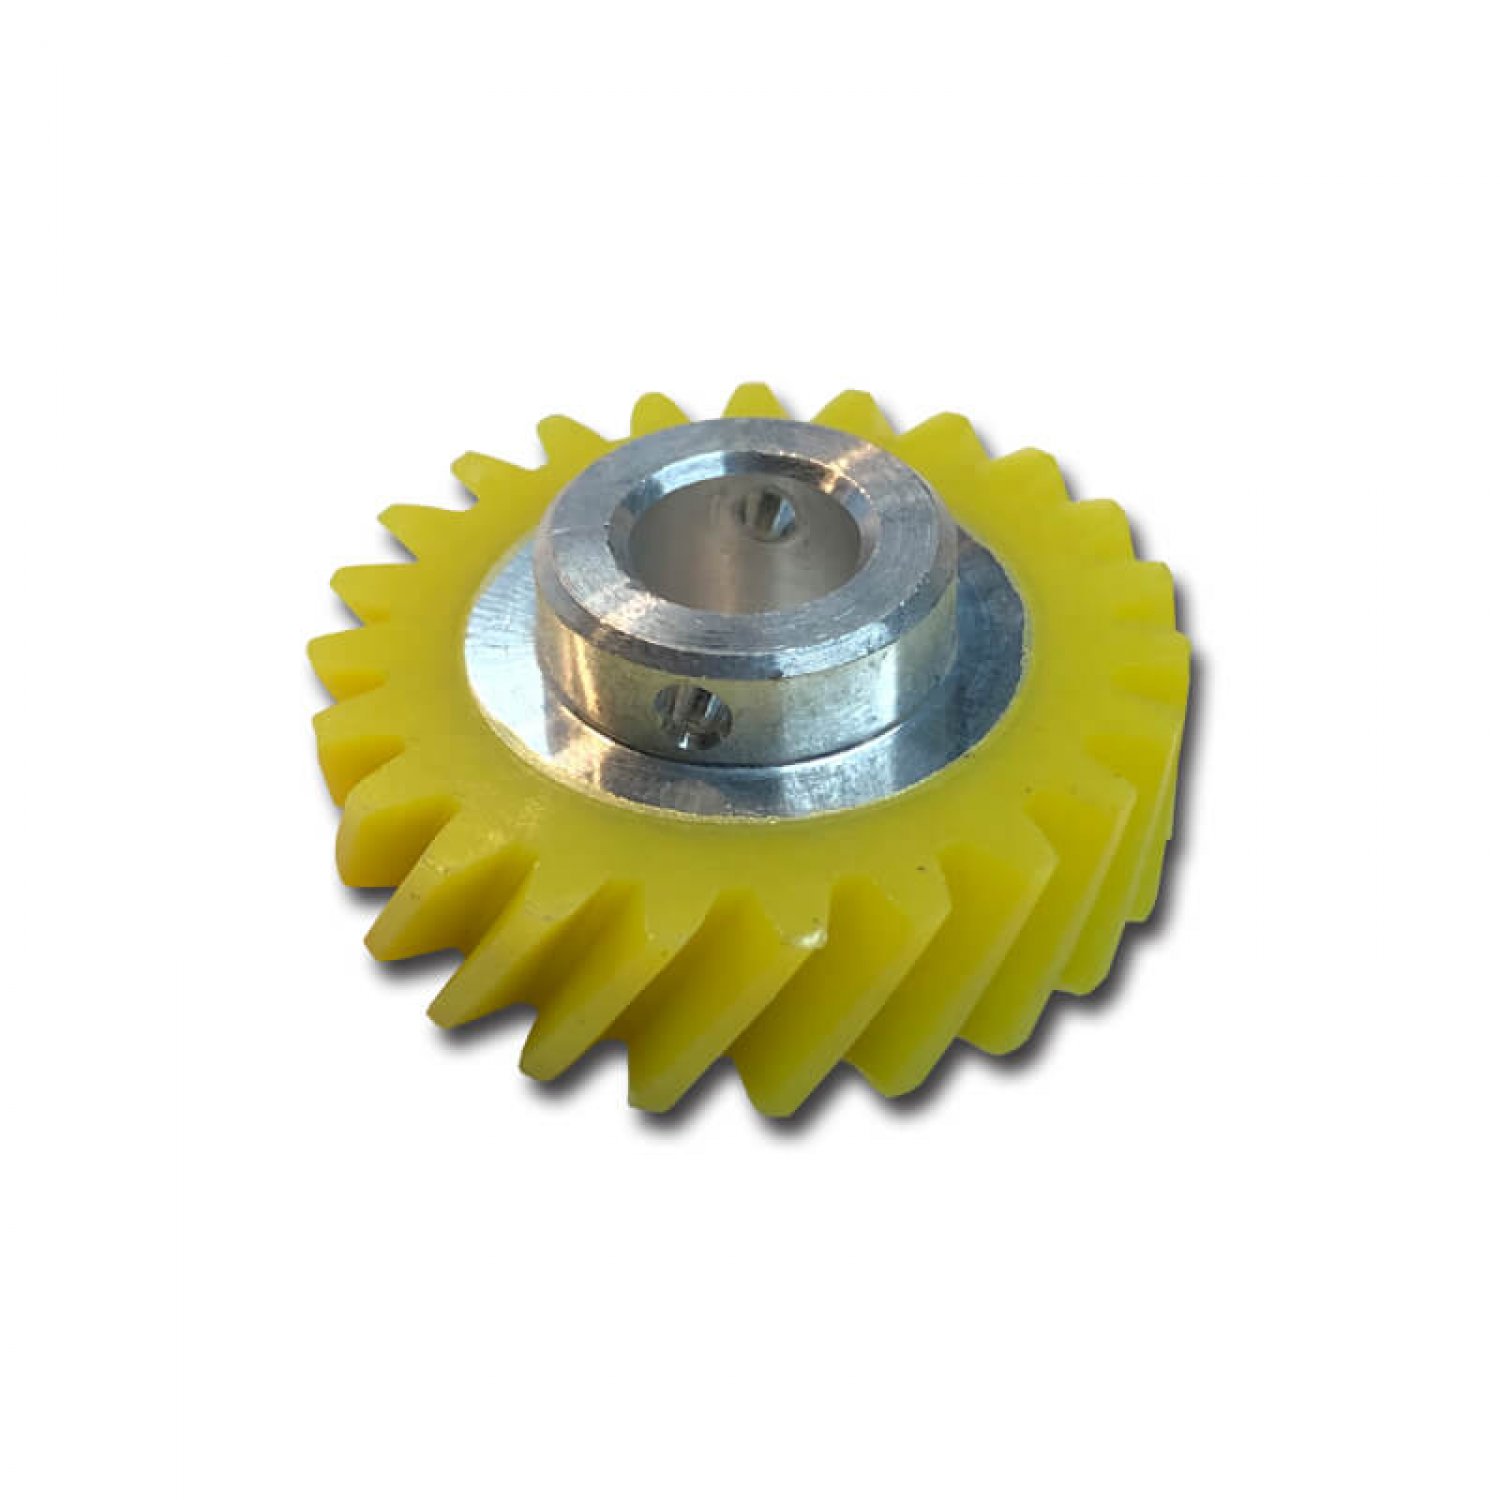 W10112253 Mixer Worm Gear Replacement for KitchenAid KSM75 Mixer